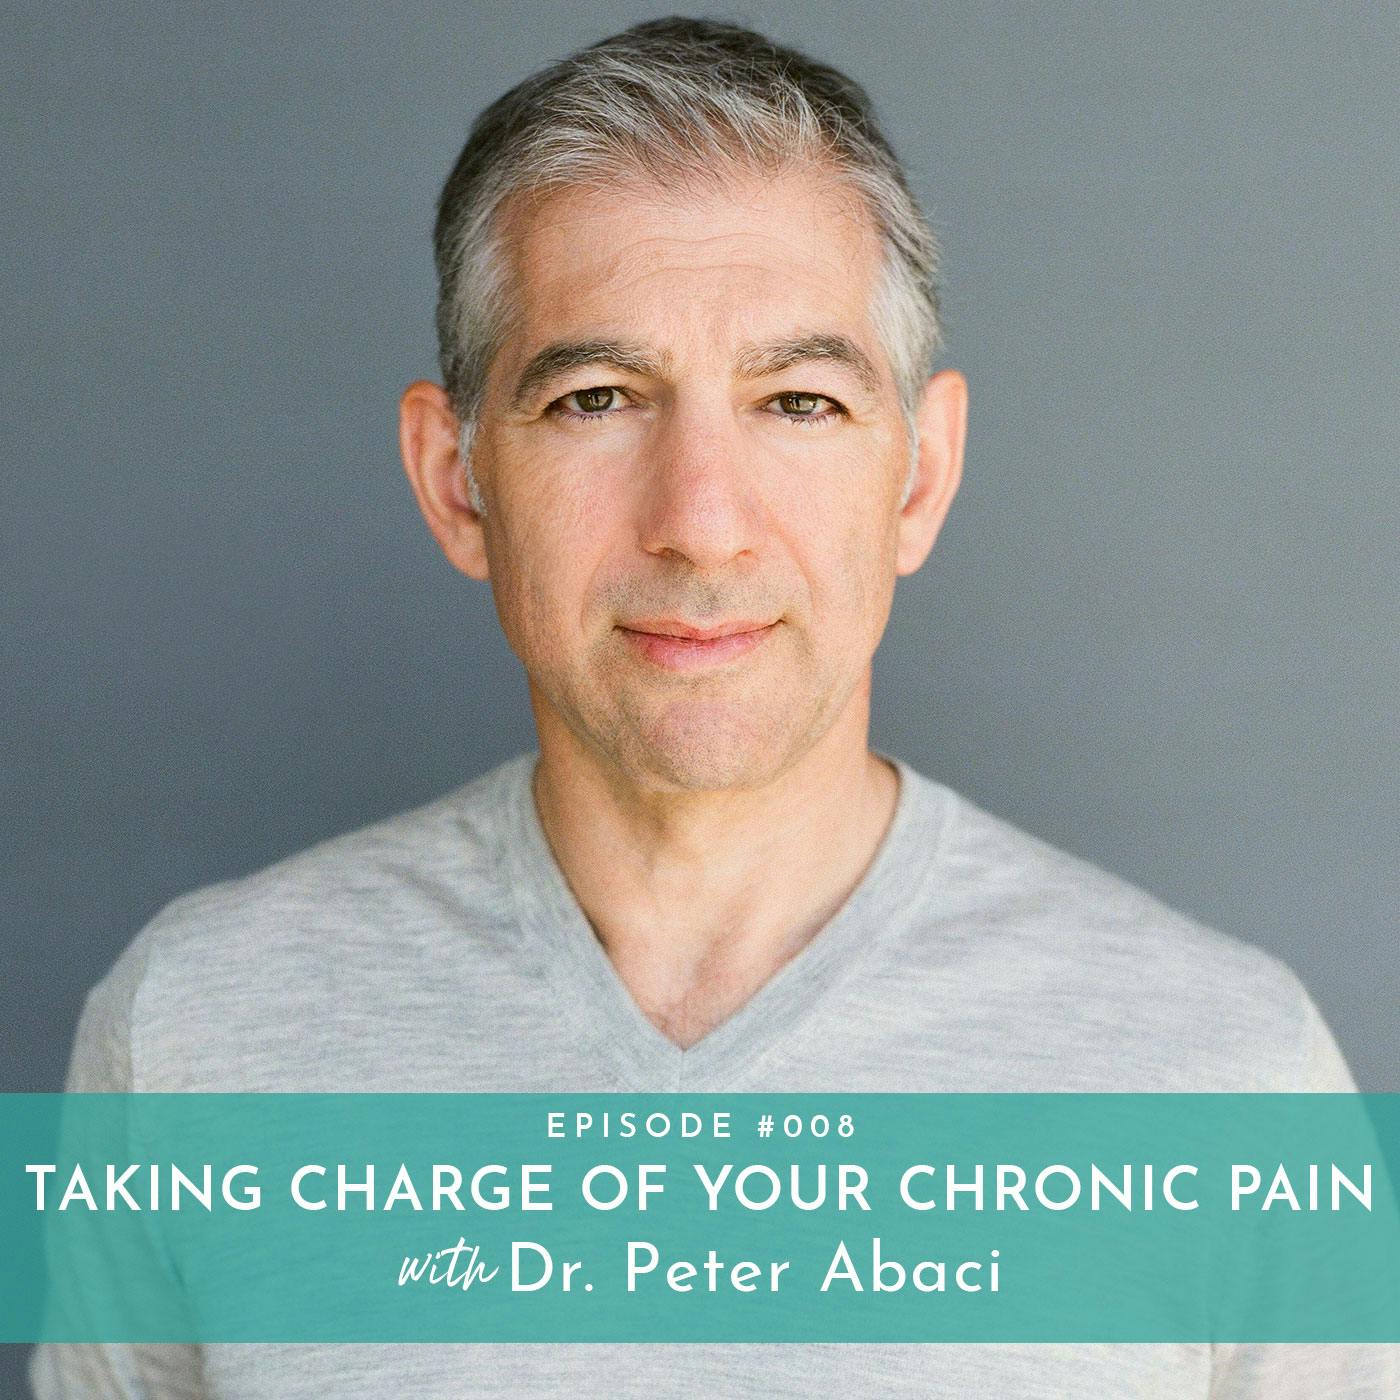 Taking Charge of Your Chronic Pain  with Dr. Peter Abaci